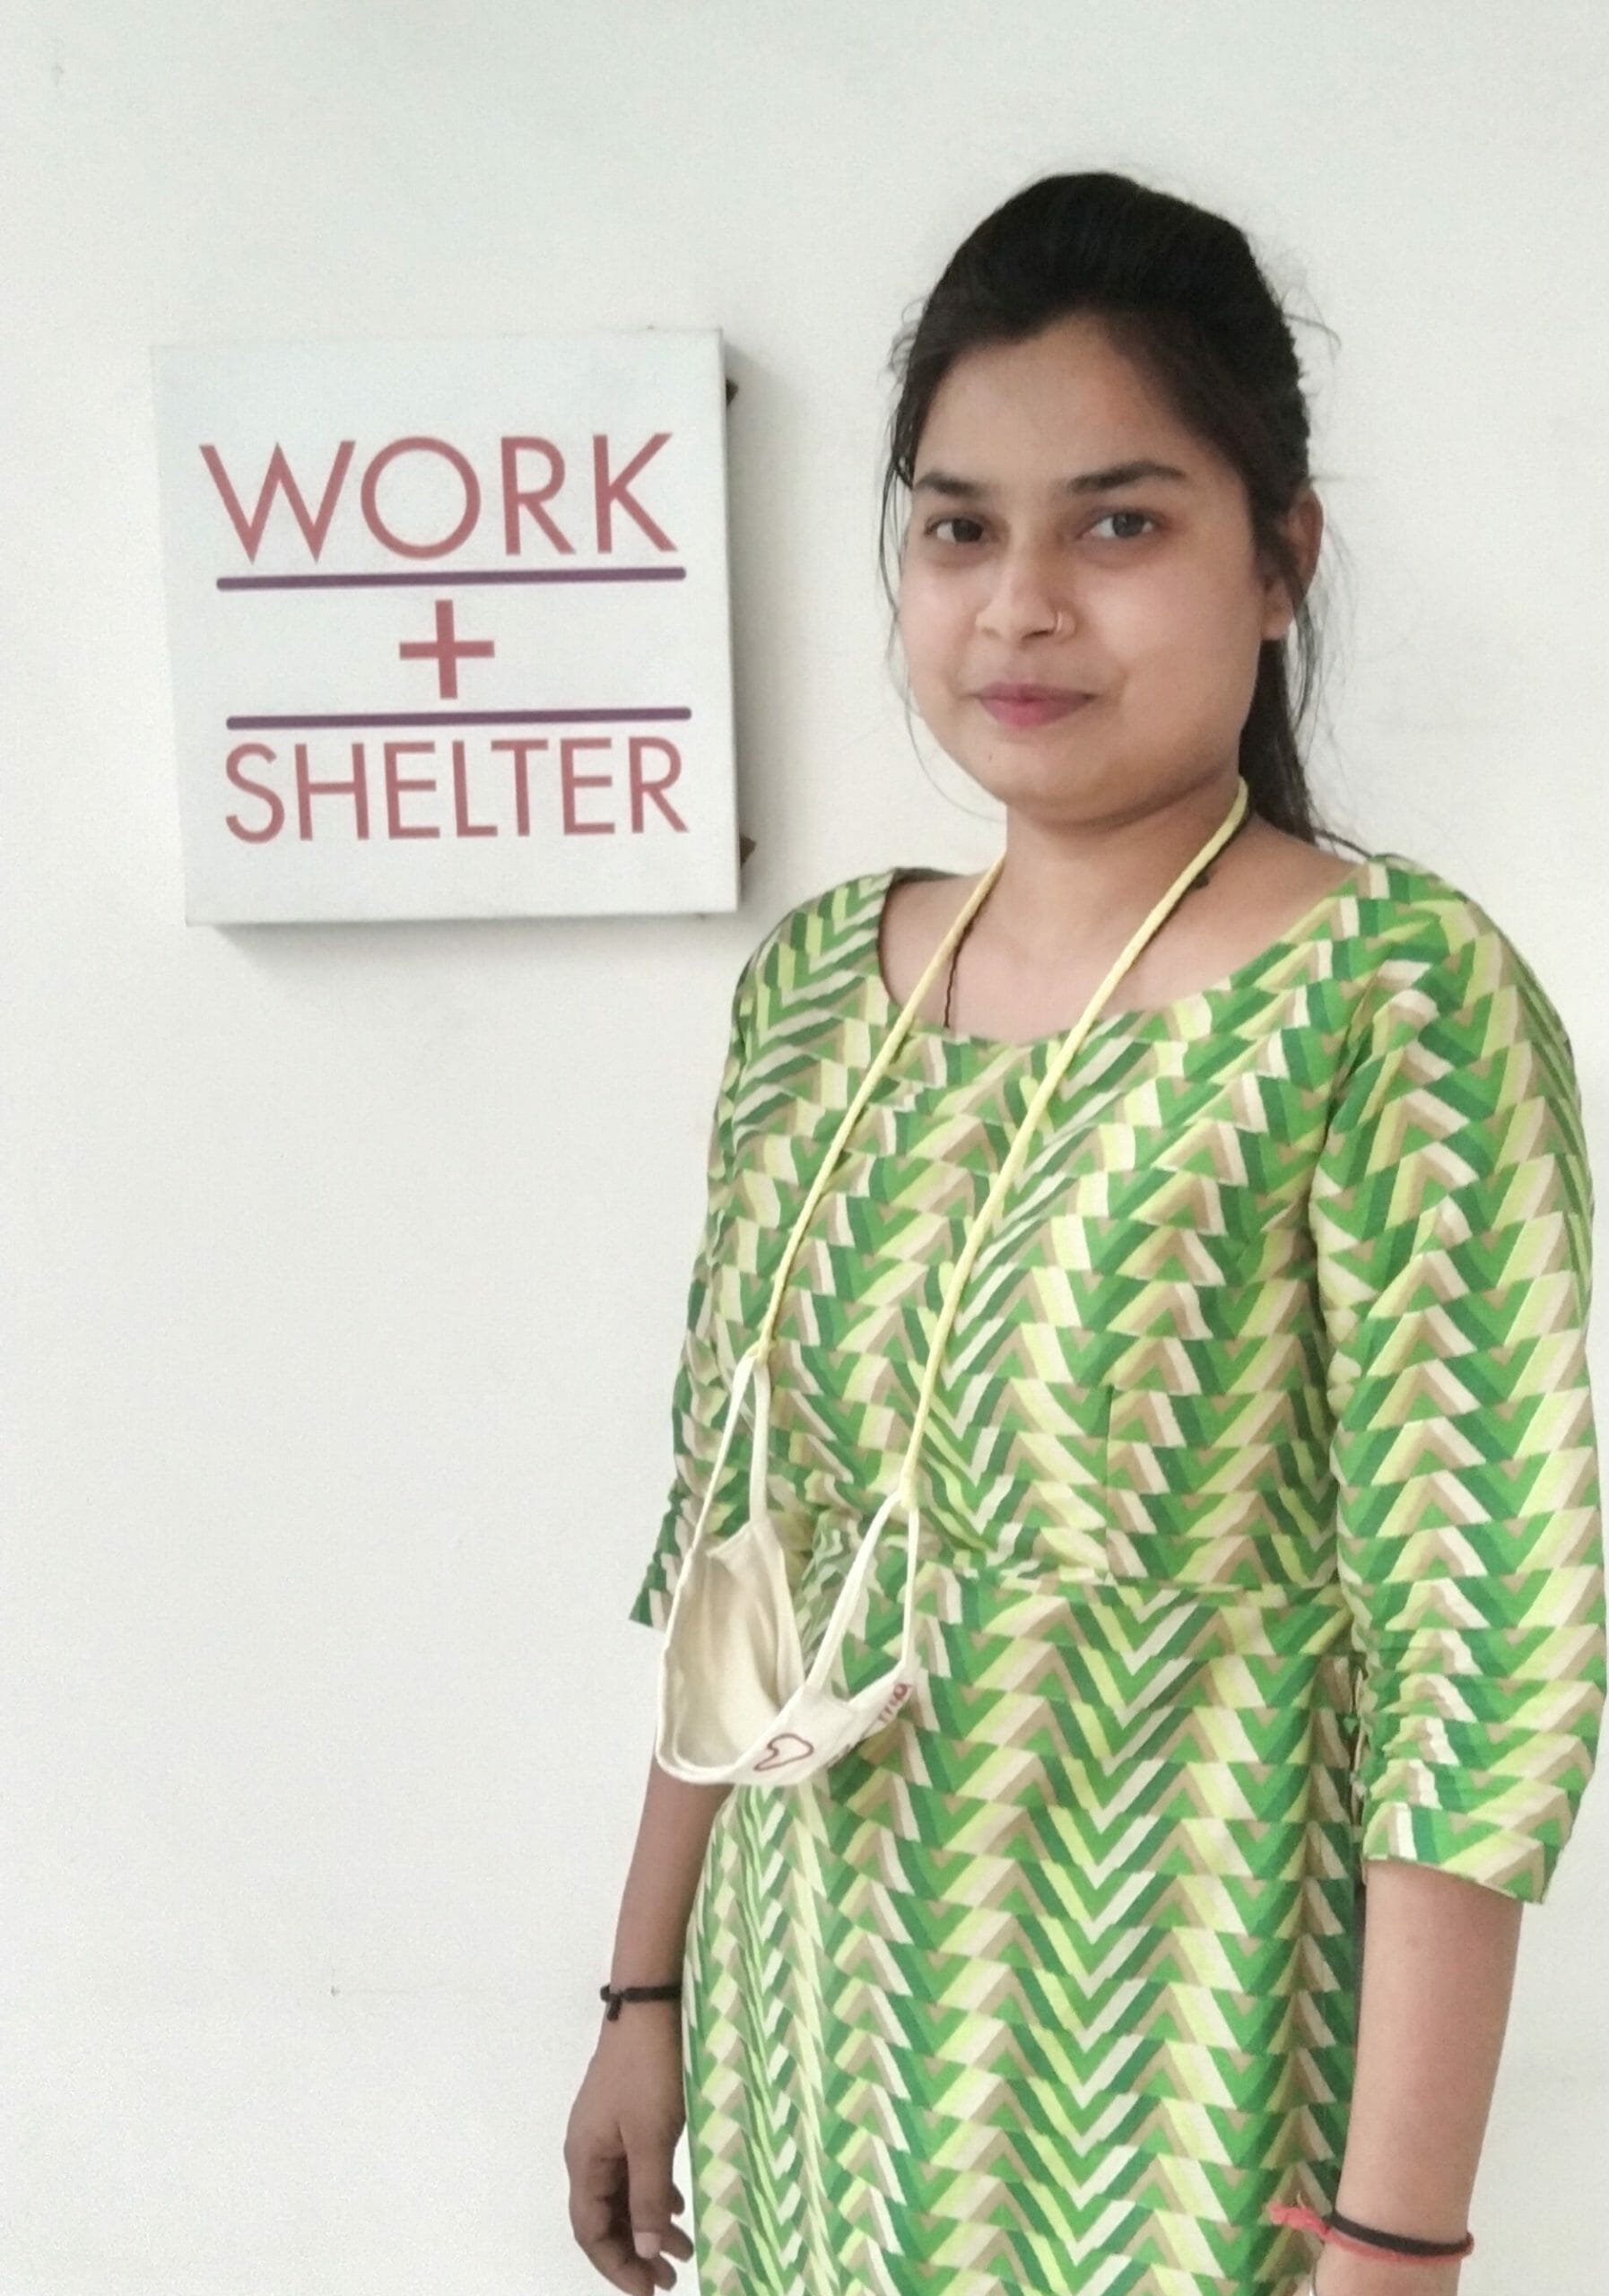 Hema, who helped to make Levi's reusable shopping bags bulk, stands next to a sign that reads Work+Shelter